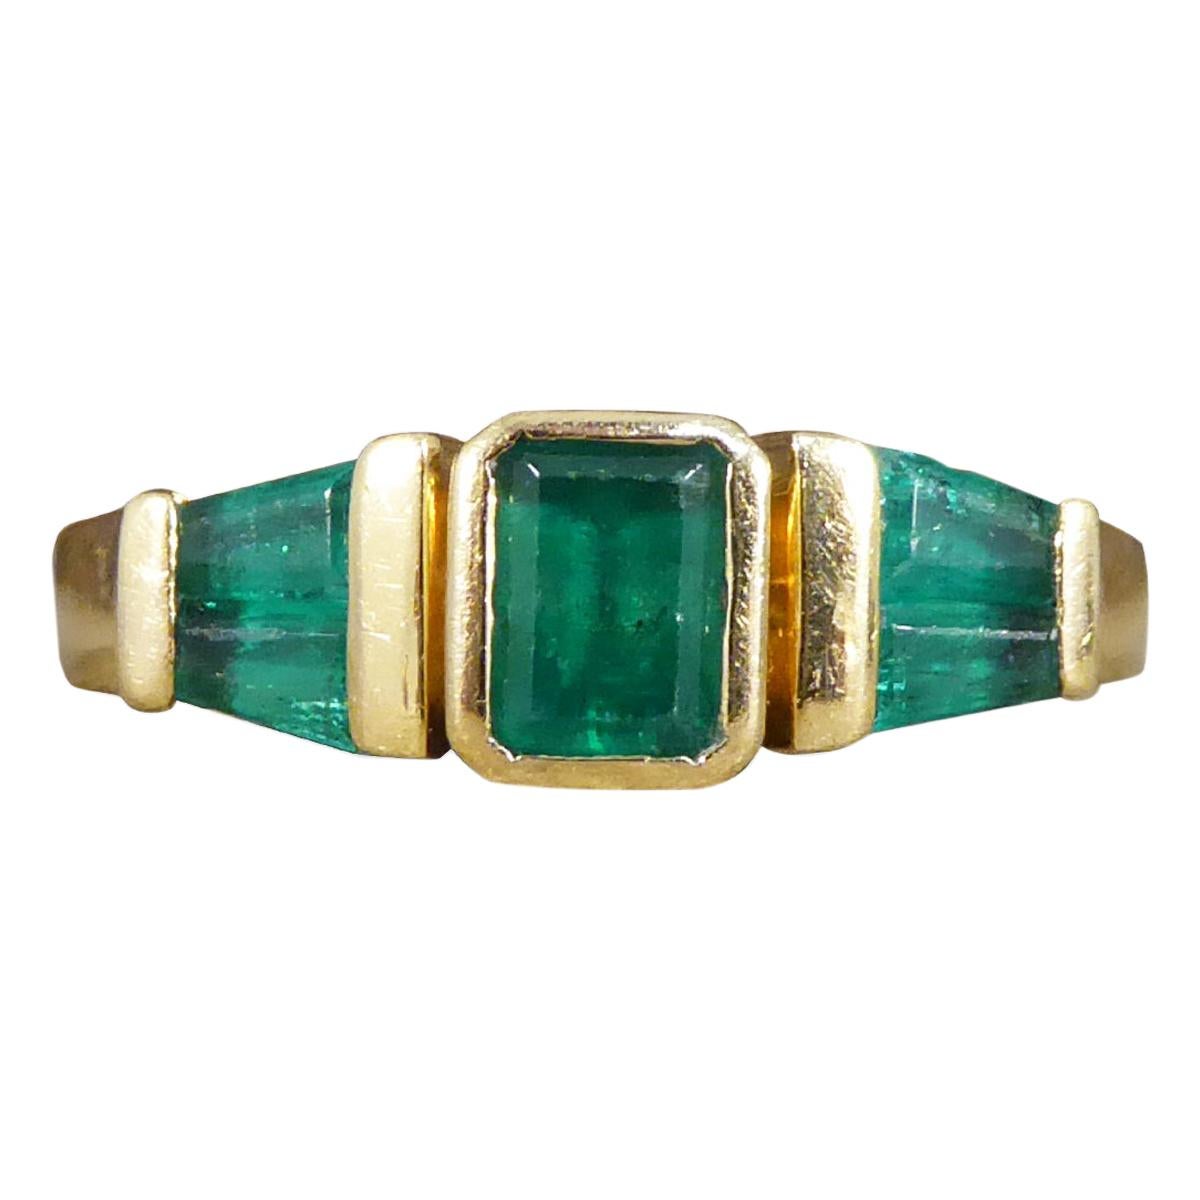 Vintage 1.00 Carat Emerald Multi Stone Staged Setting Ring in 18ct Yellow Gold